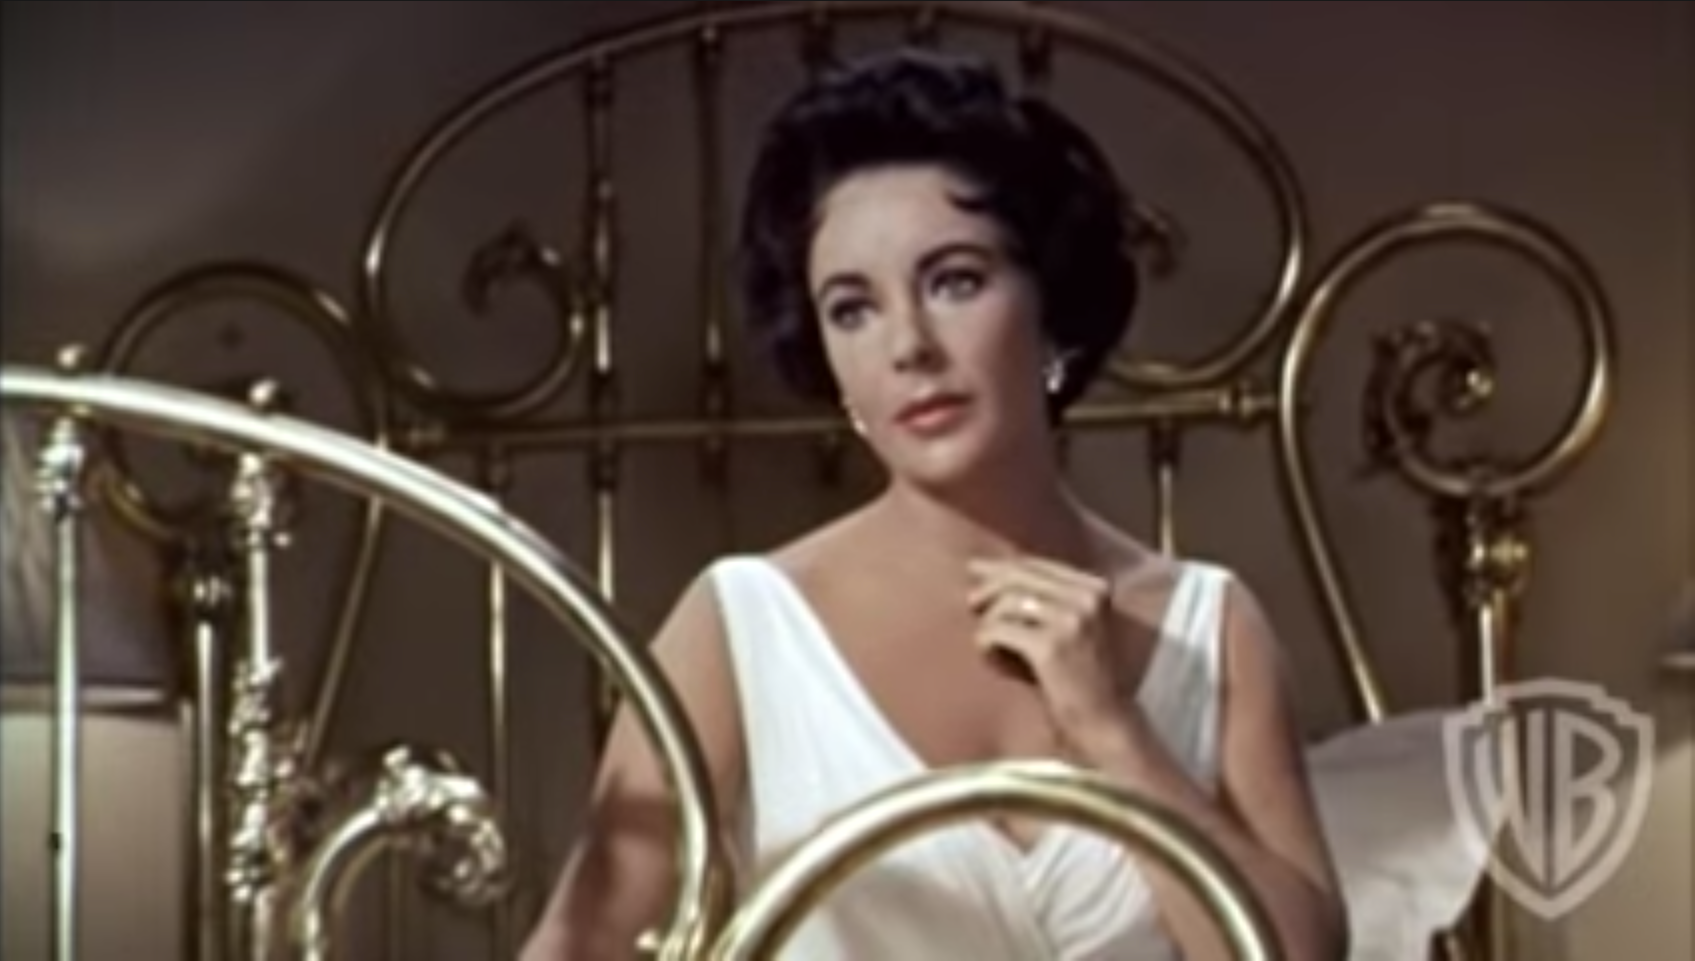 screenshot of Elizabeth Taylor from Cat on a Hot Tin Roof movie trailer on YouTube from Warner Bros.